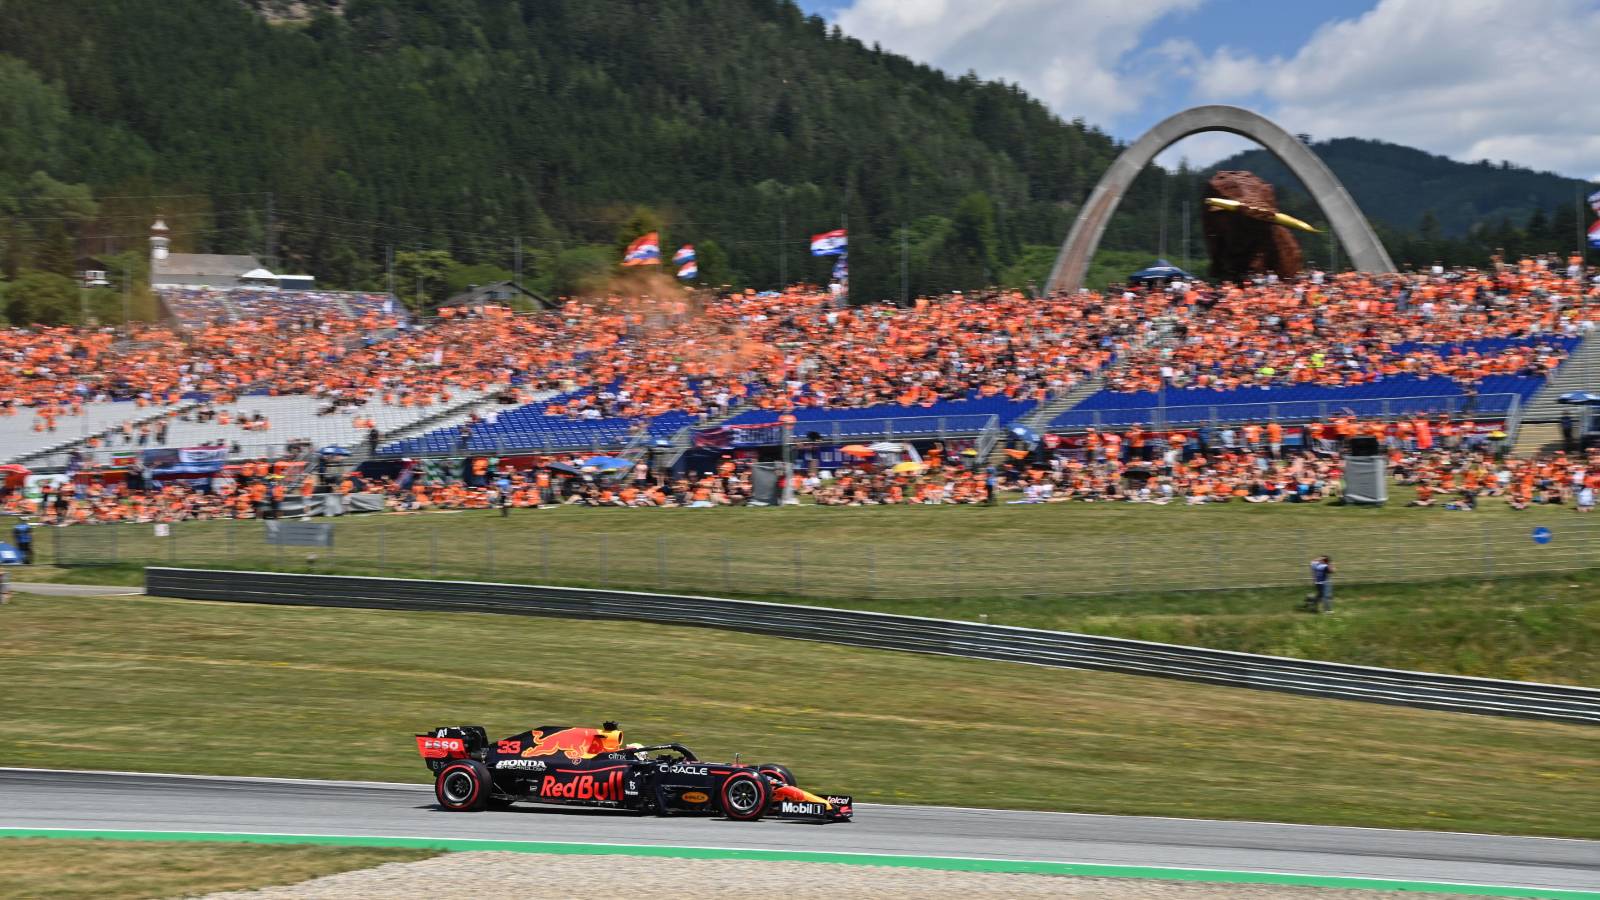 Max Verstappen at the Austrian Grand Prix. Red Bull Ring July 2021.